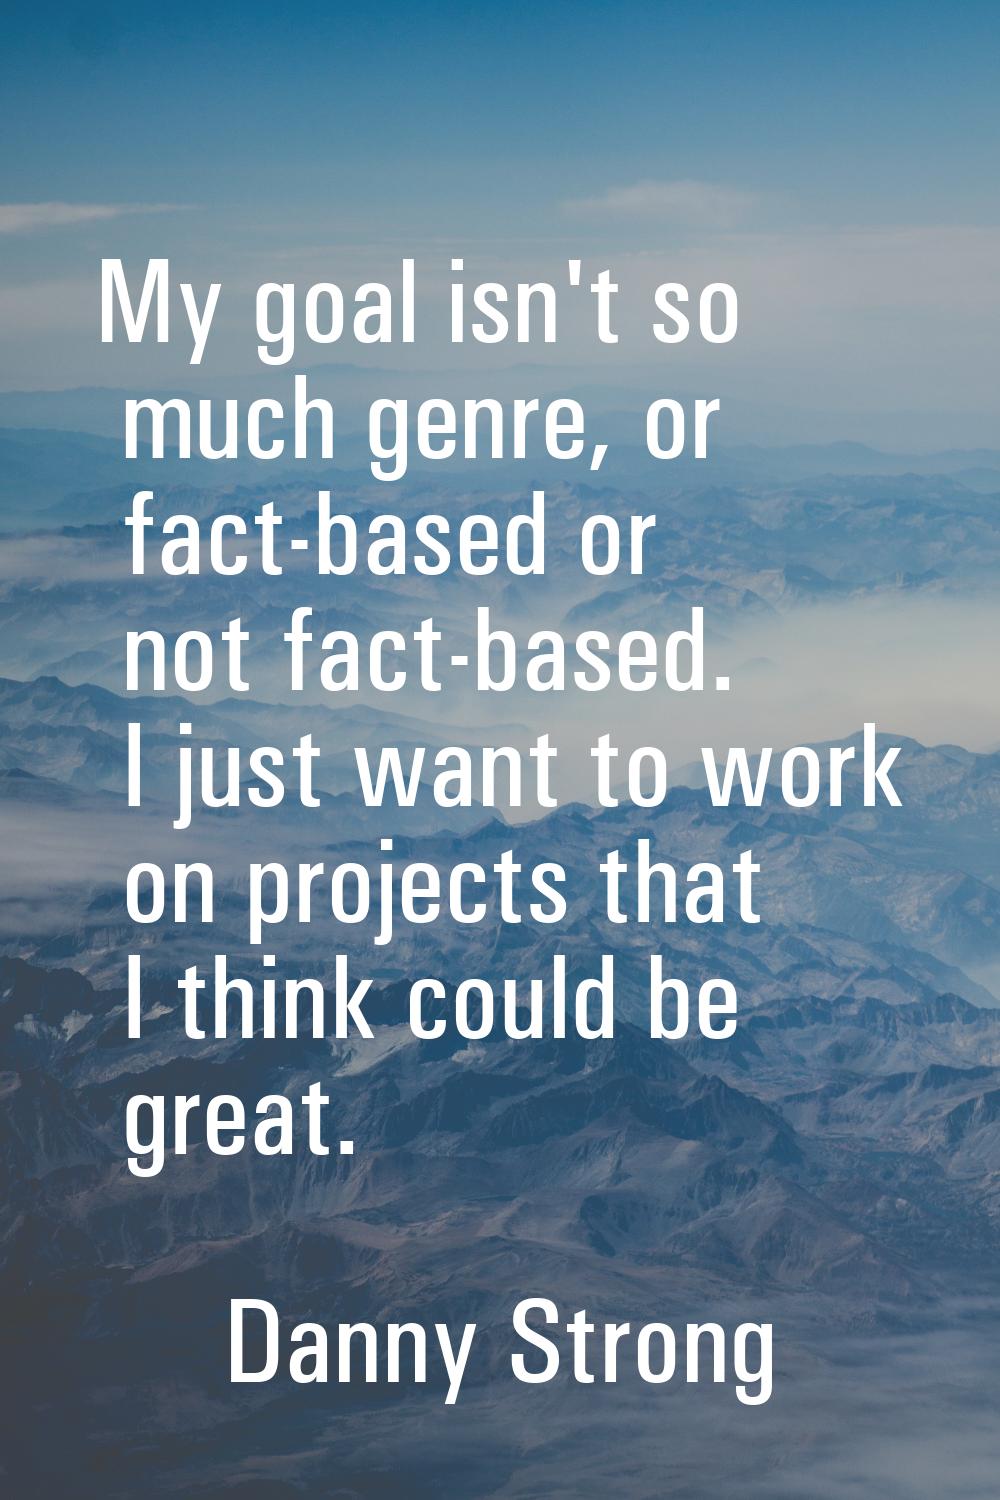 My goal isn't so much genre, or fact-based or not fact-based. I just want to work on projects that 